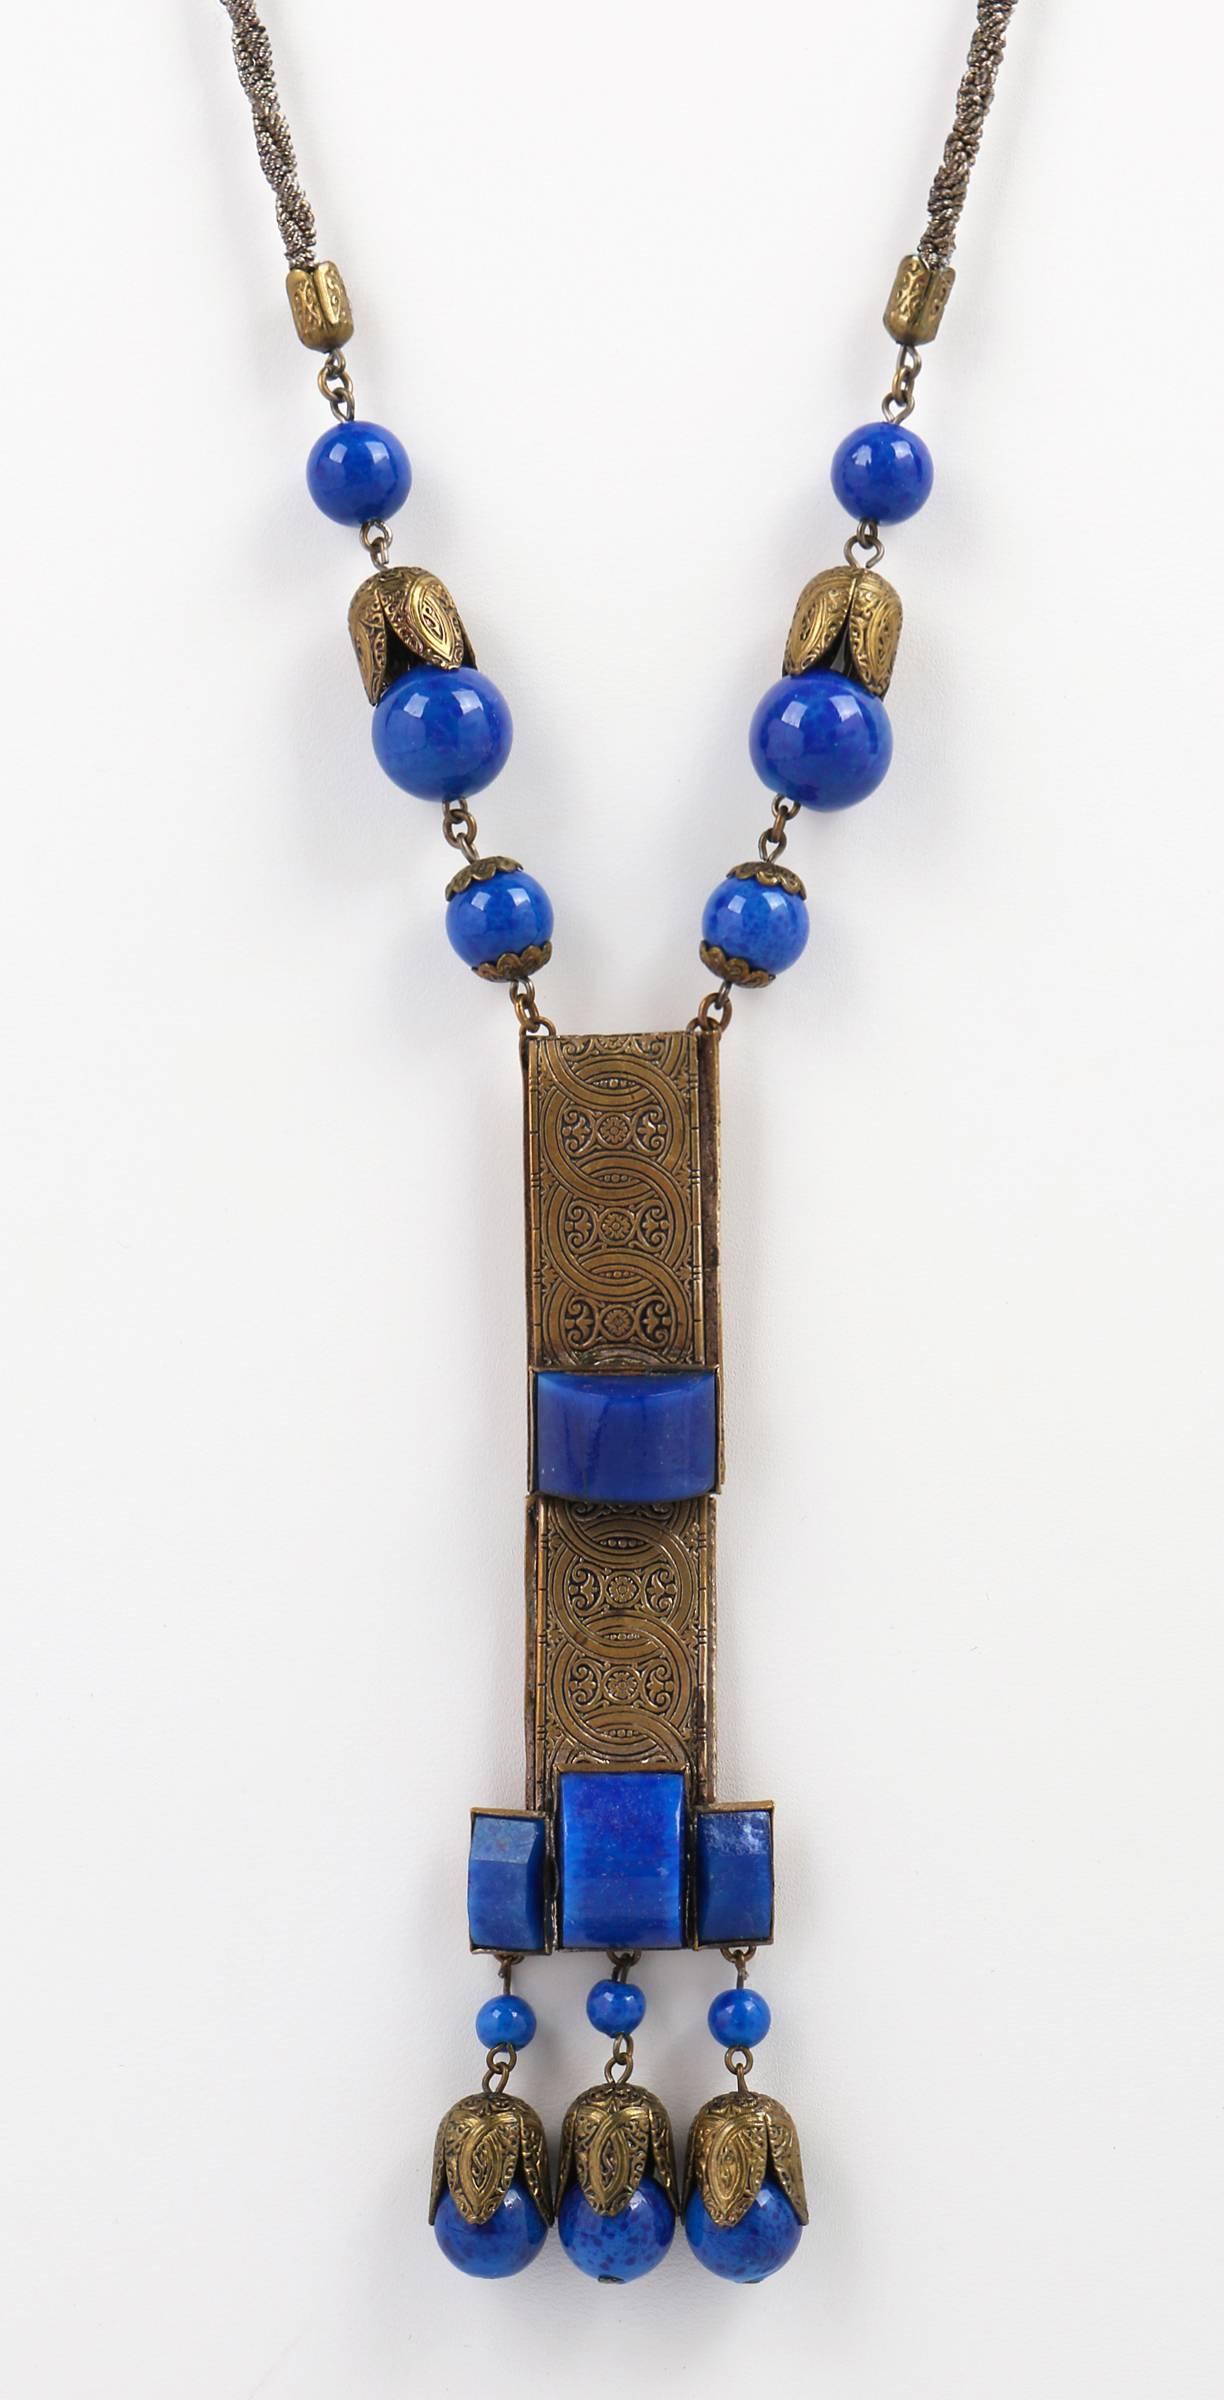 Vintage c.1920s Art Deco French rope brass chain and Czech blue lapis glass sautoir pendant necklace. Delicate French rope brass tone chain has a spiraling braided appearance, measuring approximately 26